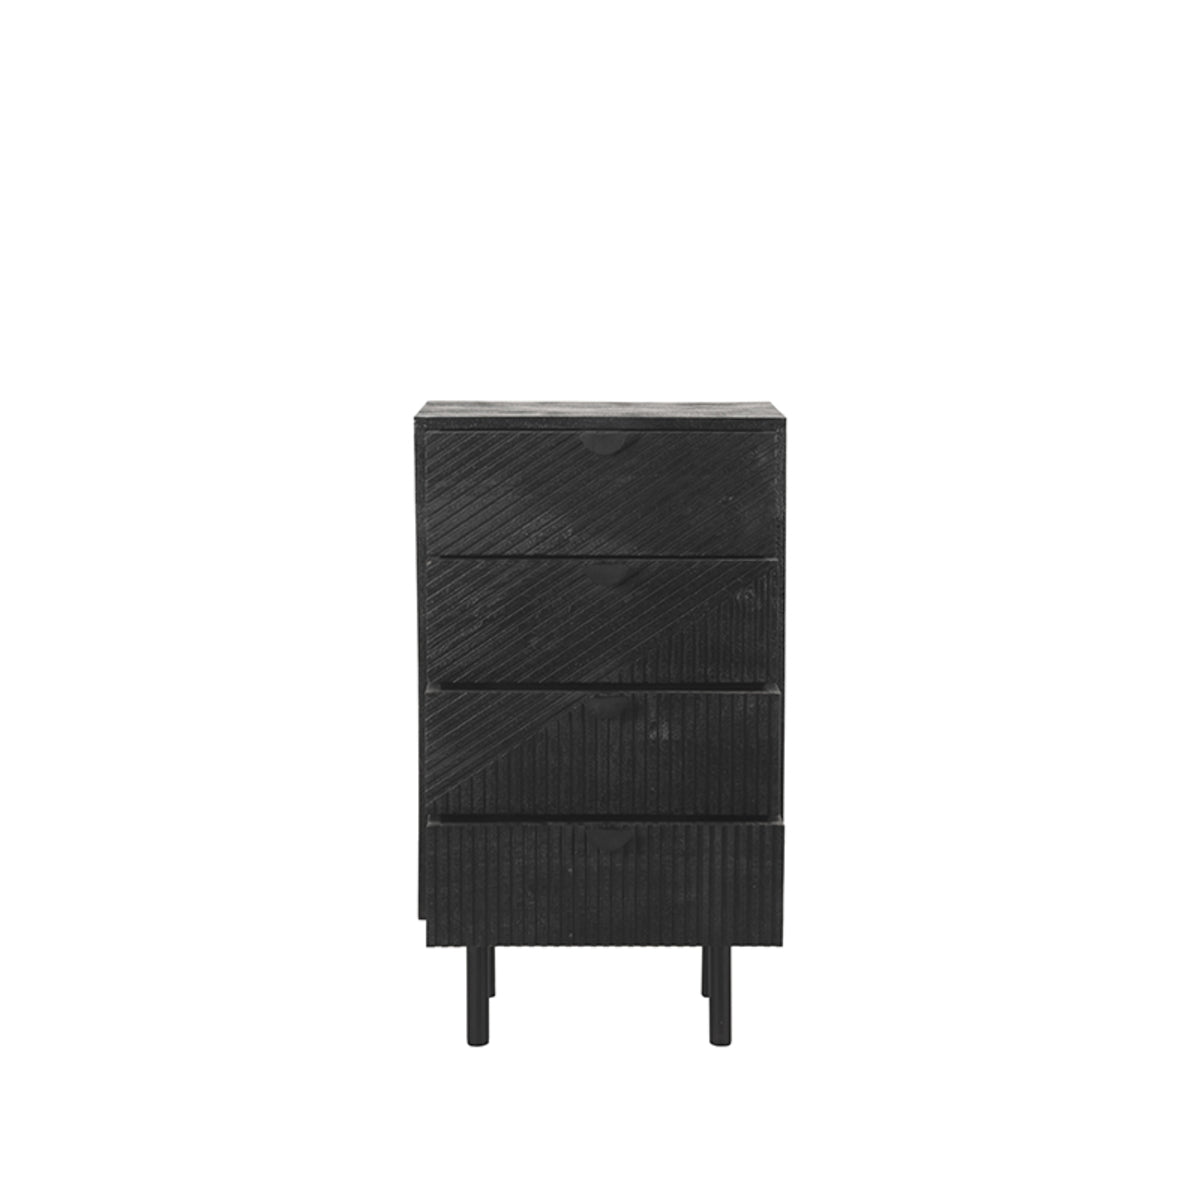 LABEL51 Cotia chest of drawers - Black - Mango wood